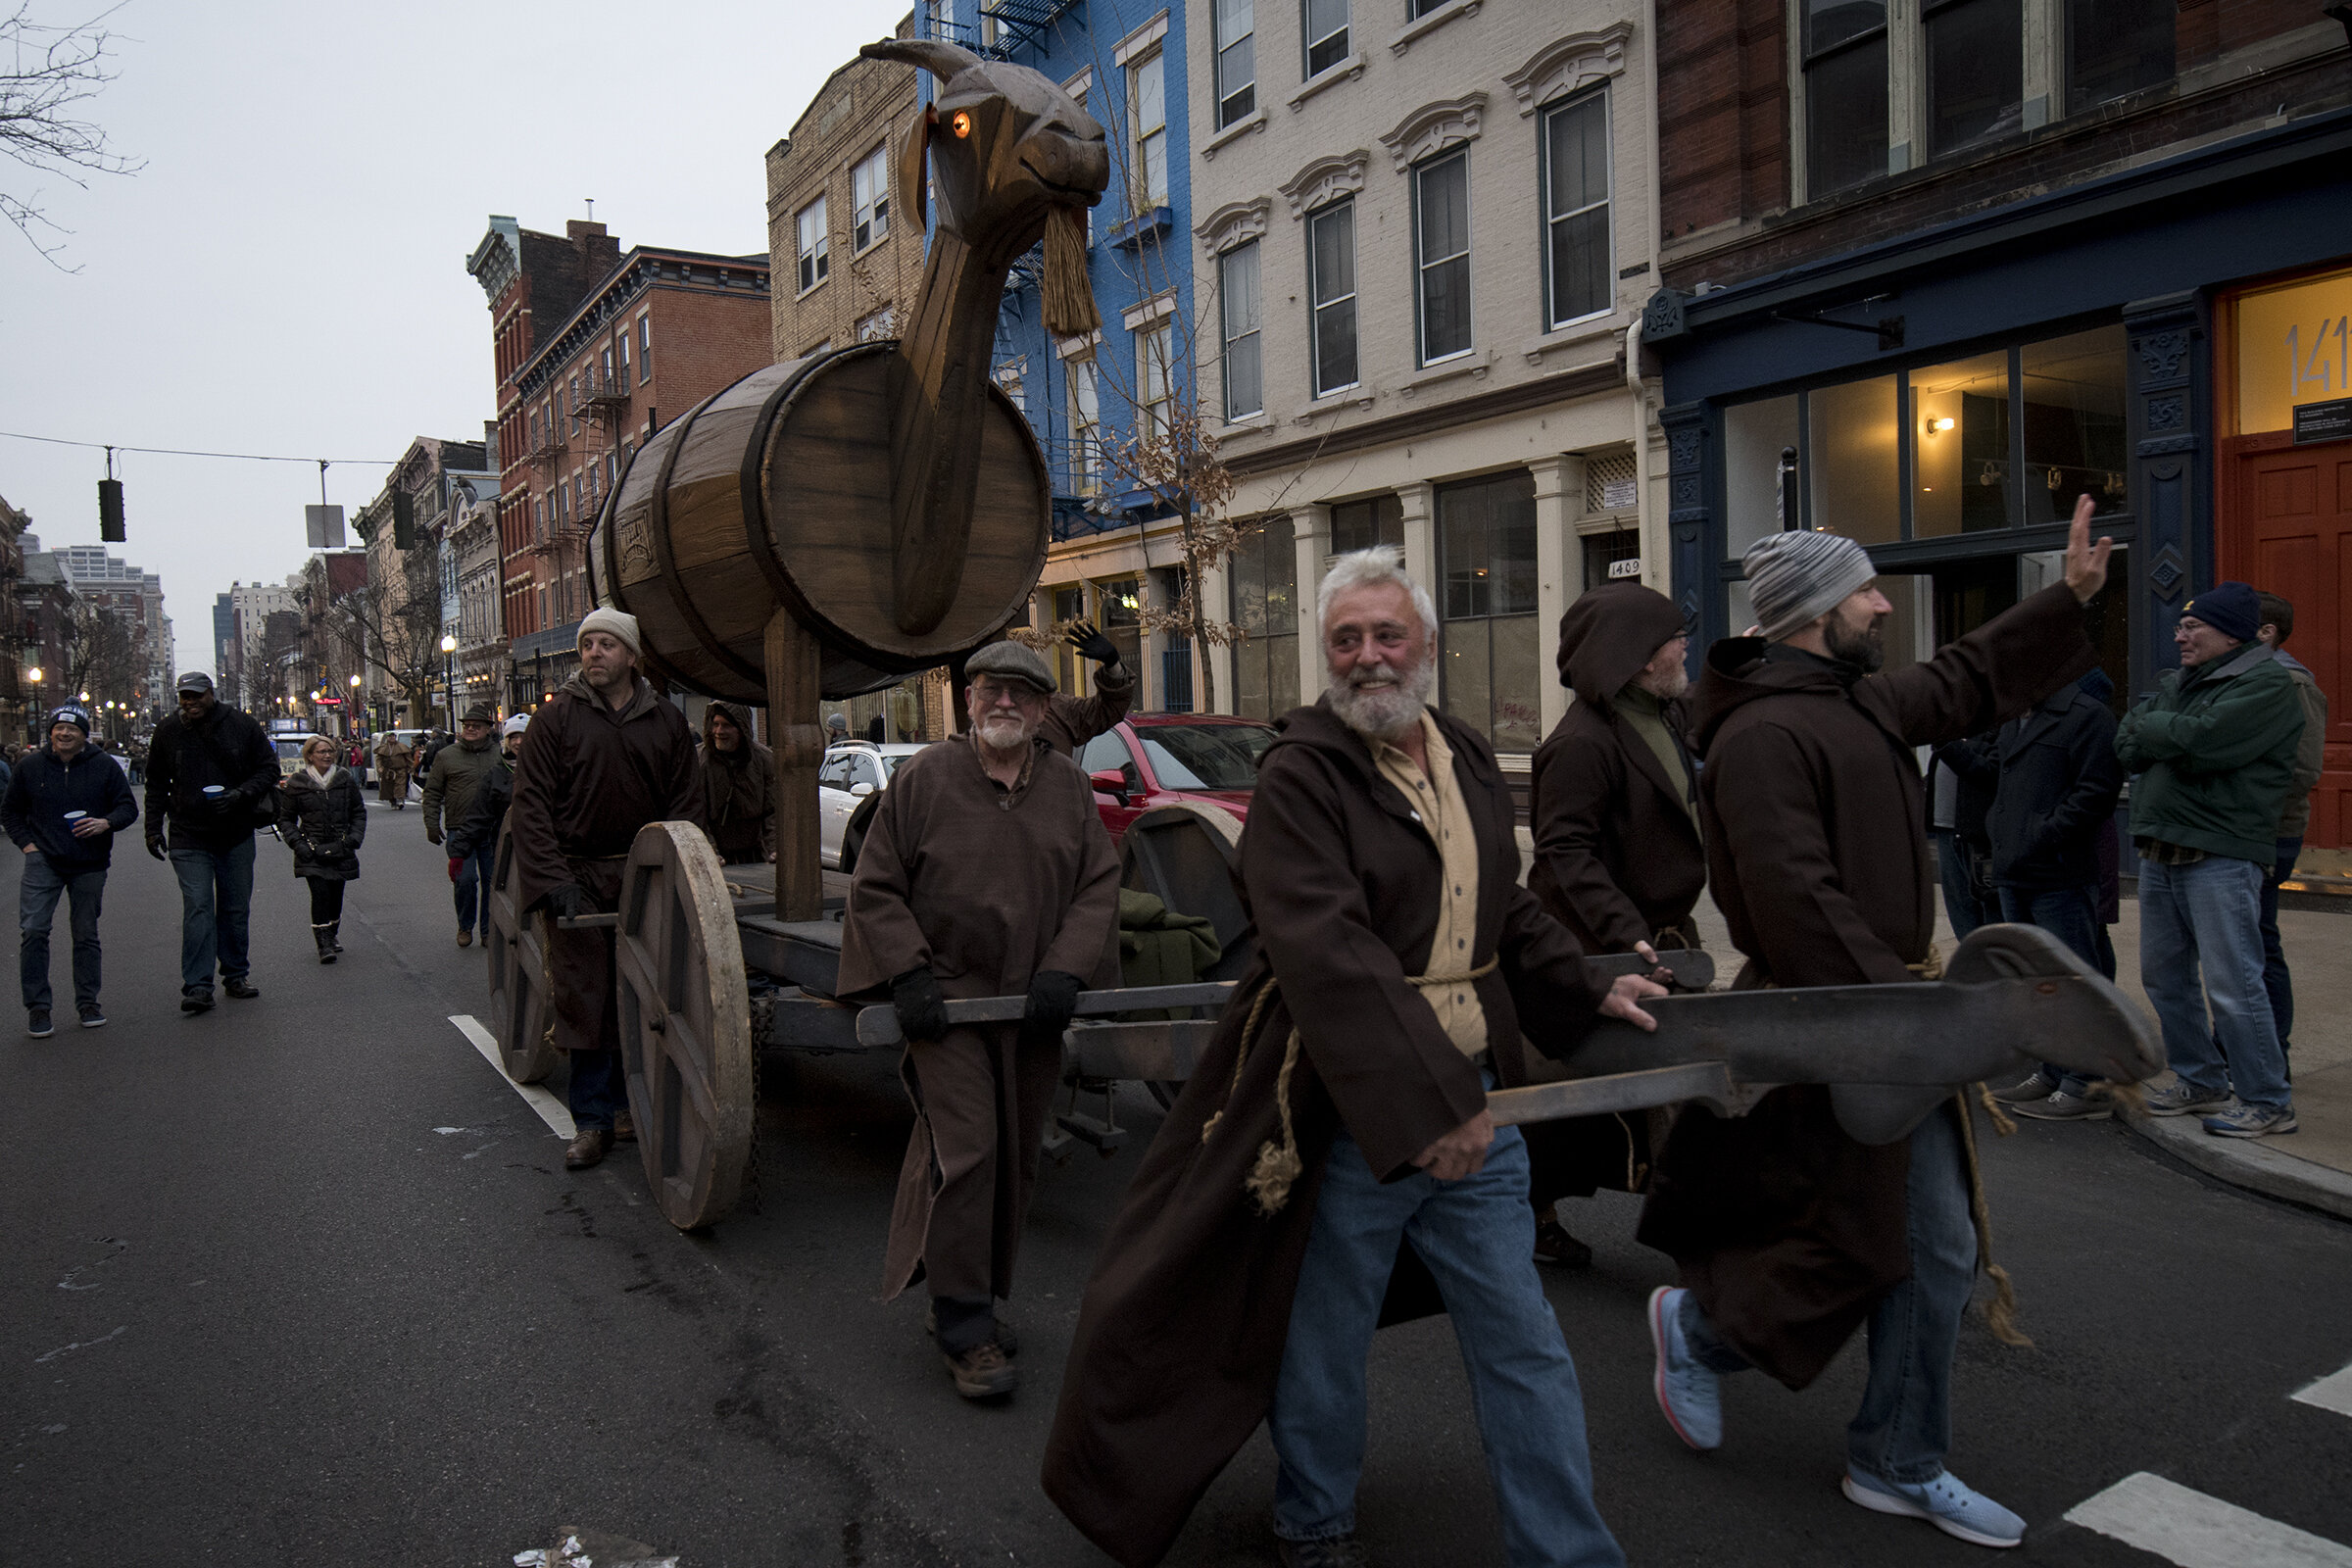  The annual Bockfest parade marches through the streets of Over-the-Rhine to kick off the three-day bock beer event at Christian Moerlein Brewing Friday, March 1, 2019 in Cincinnati, Ohio. 